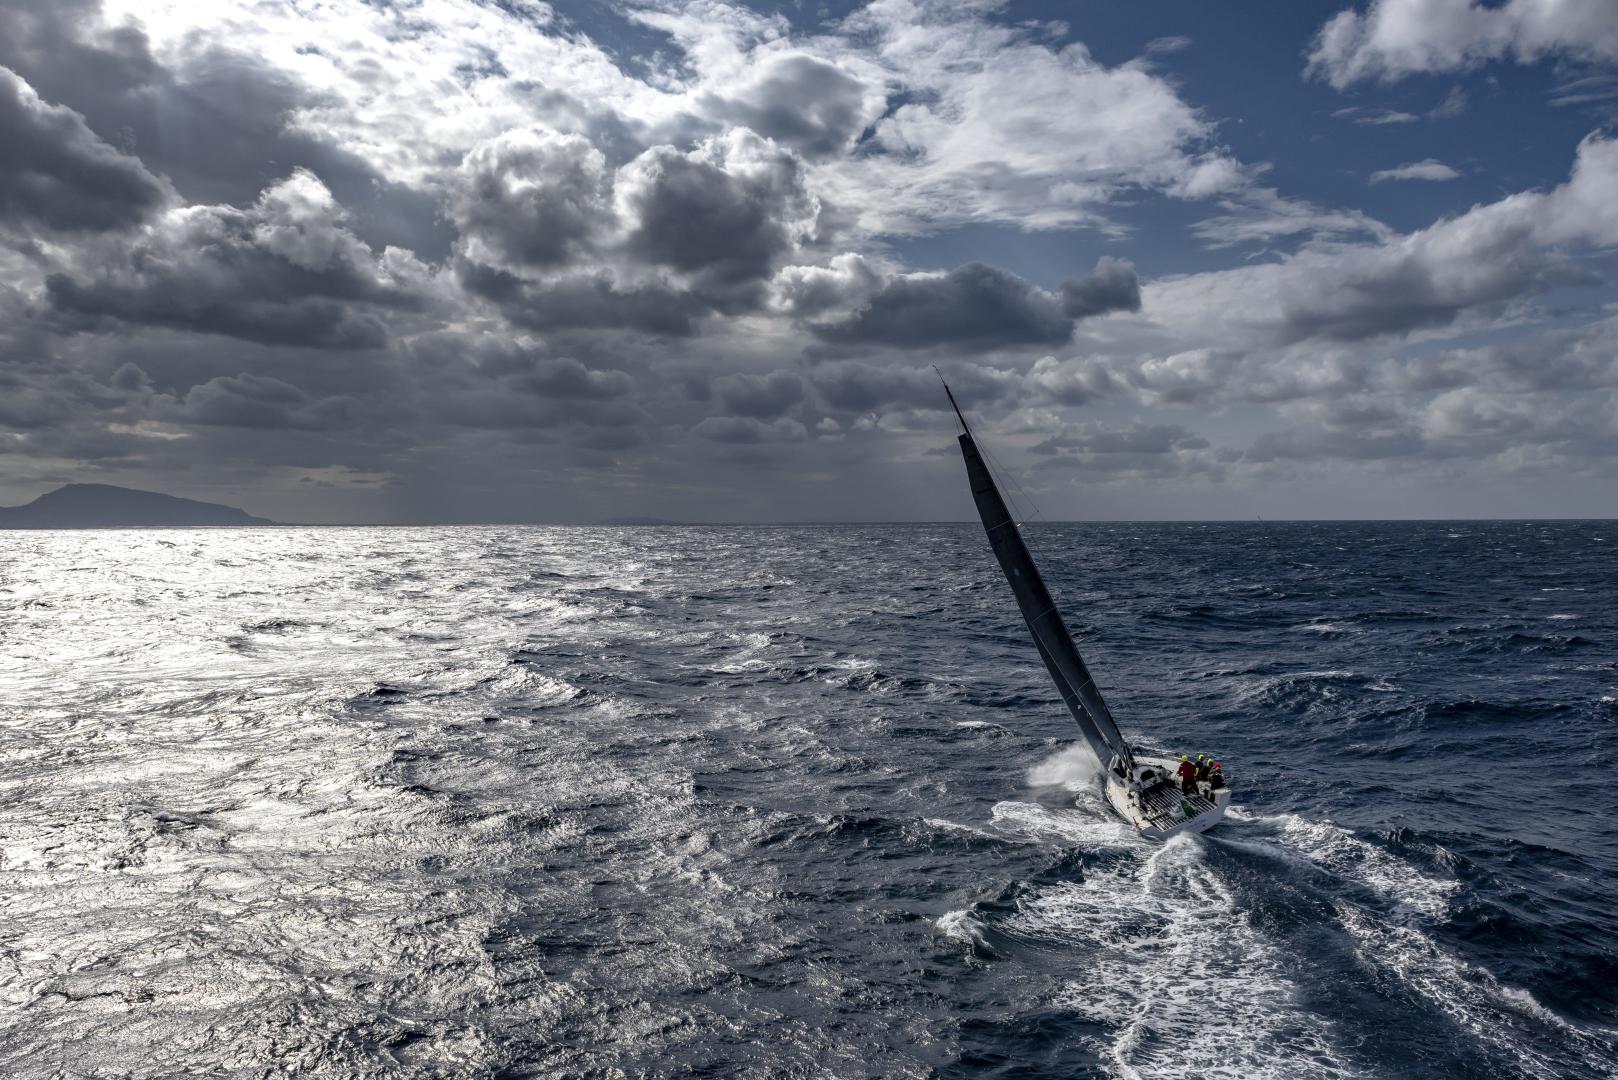 Rolex Middle Sea Race: Cautiously Moving Forward with Arrangements